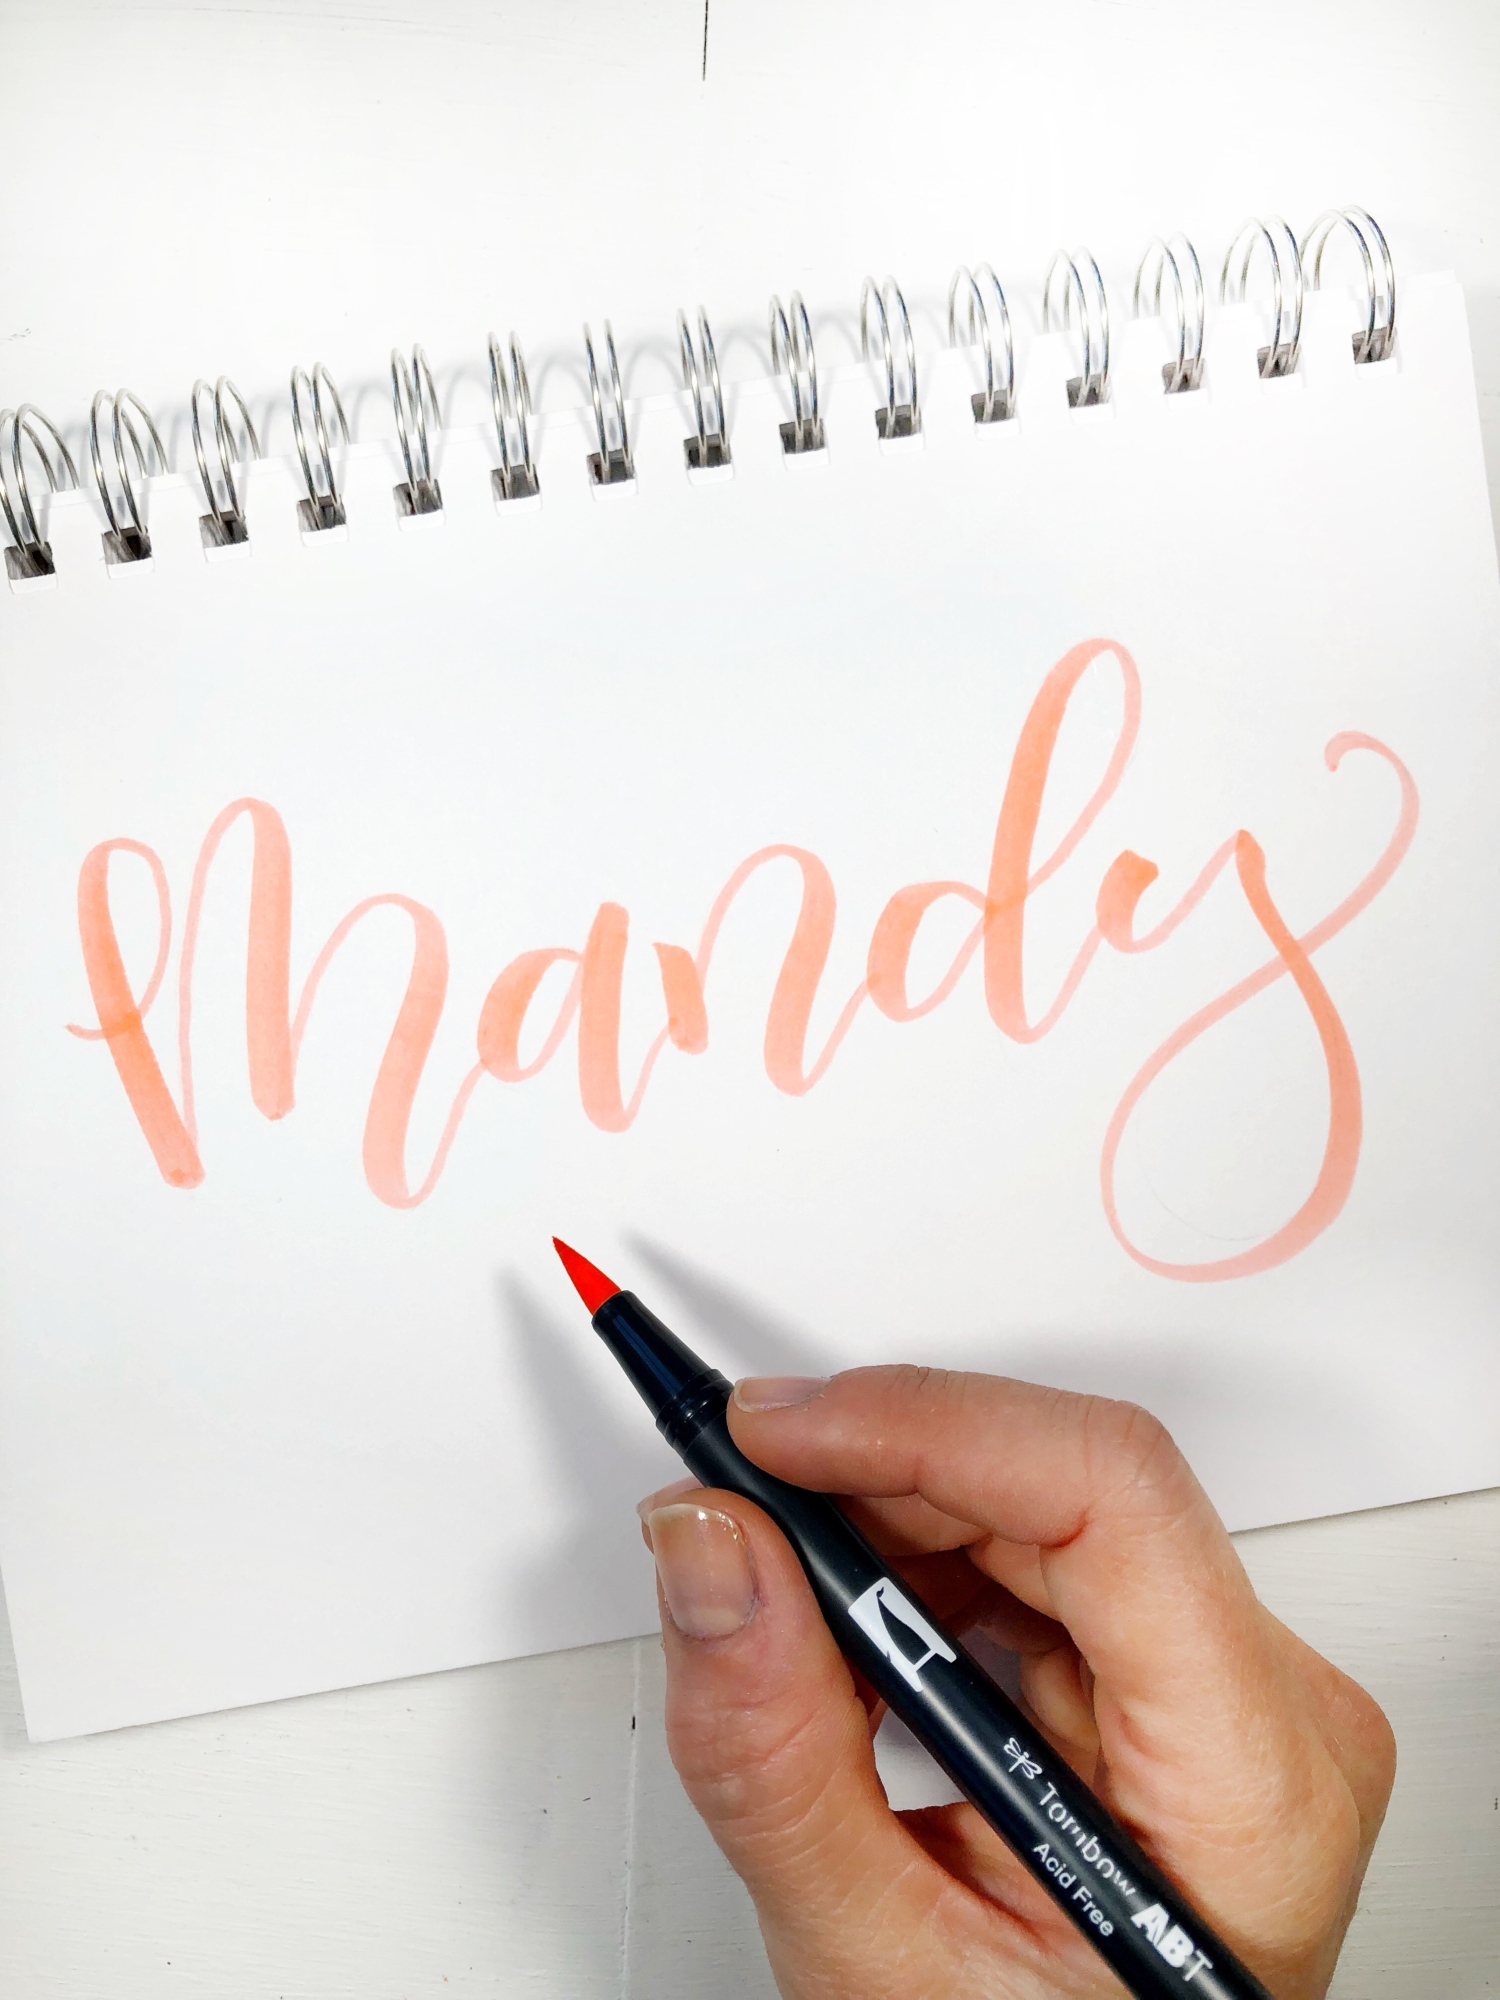 Blending and Shadowing Techniques with @tombowusa. Learn how from @aheartenedcalling #tombow #handlettering